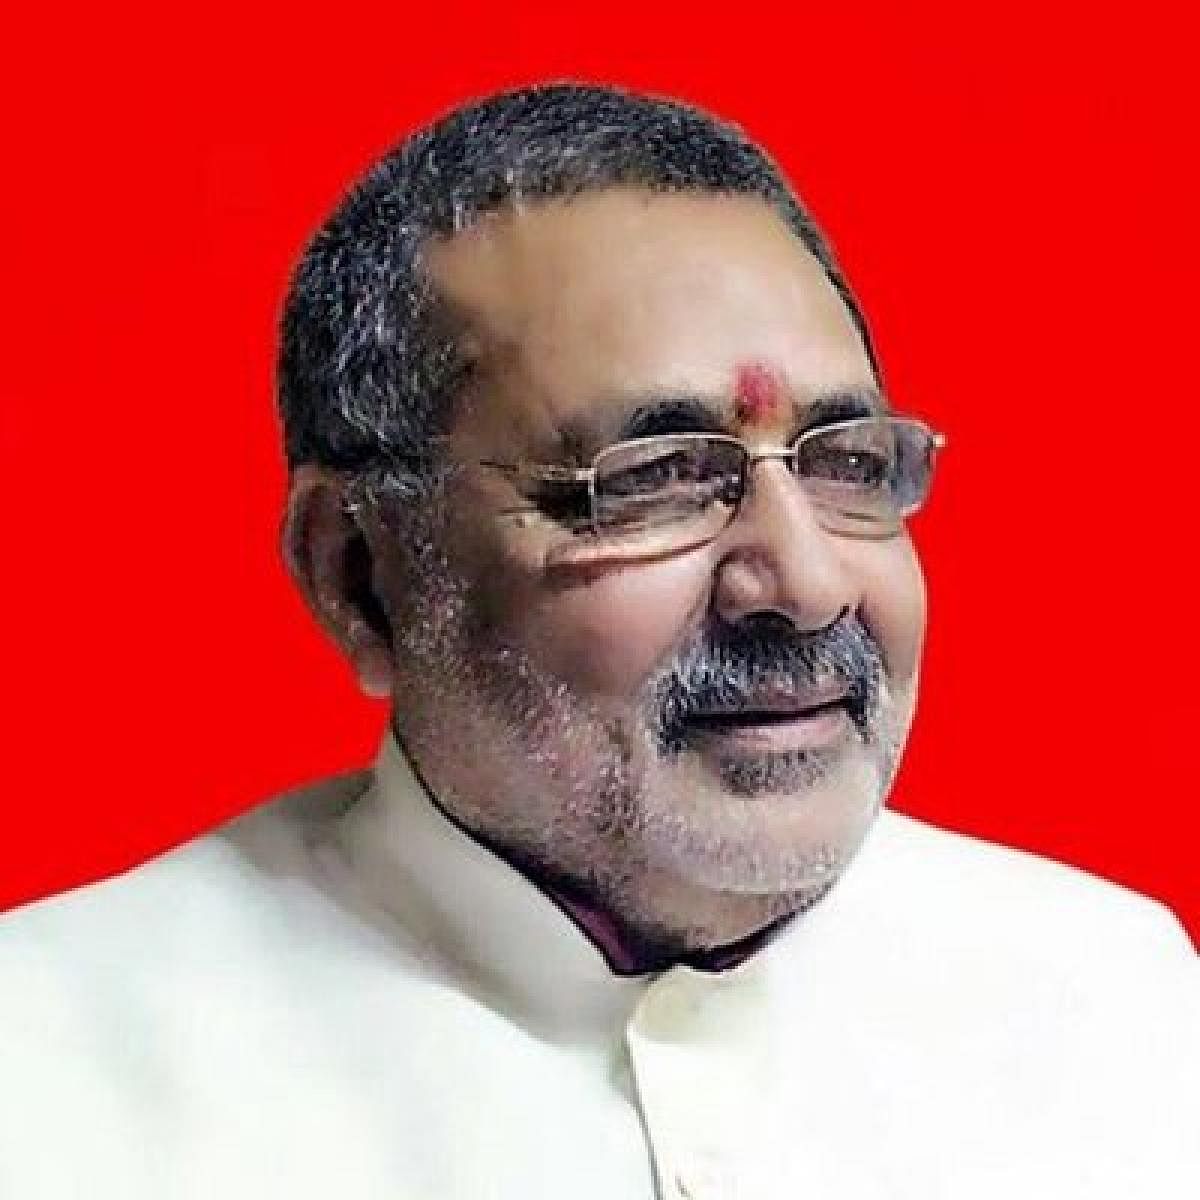 Vote for BJP if you want to escape slavery that followed Mughal invasion: Giriraj Singh to Delhi voters